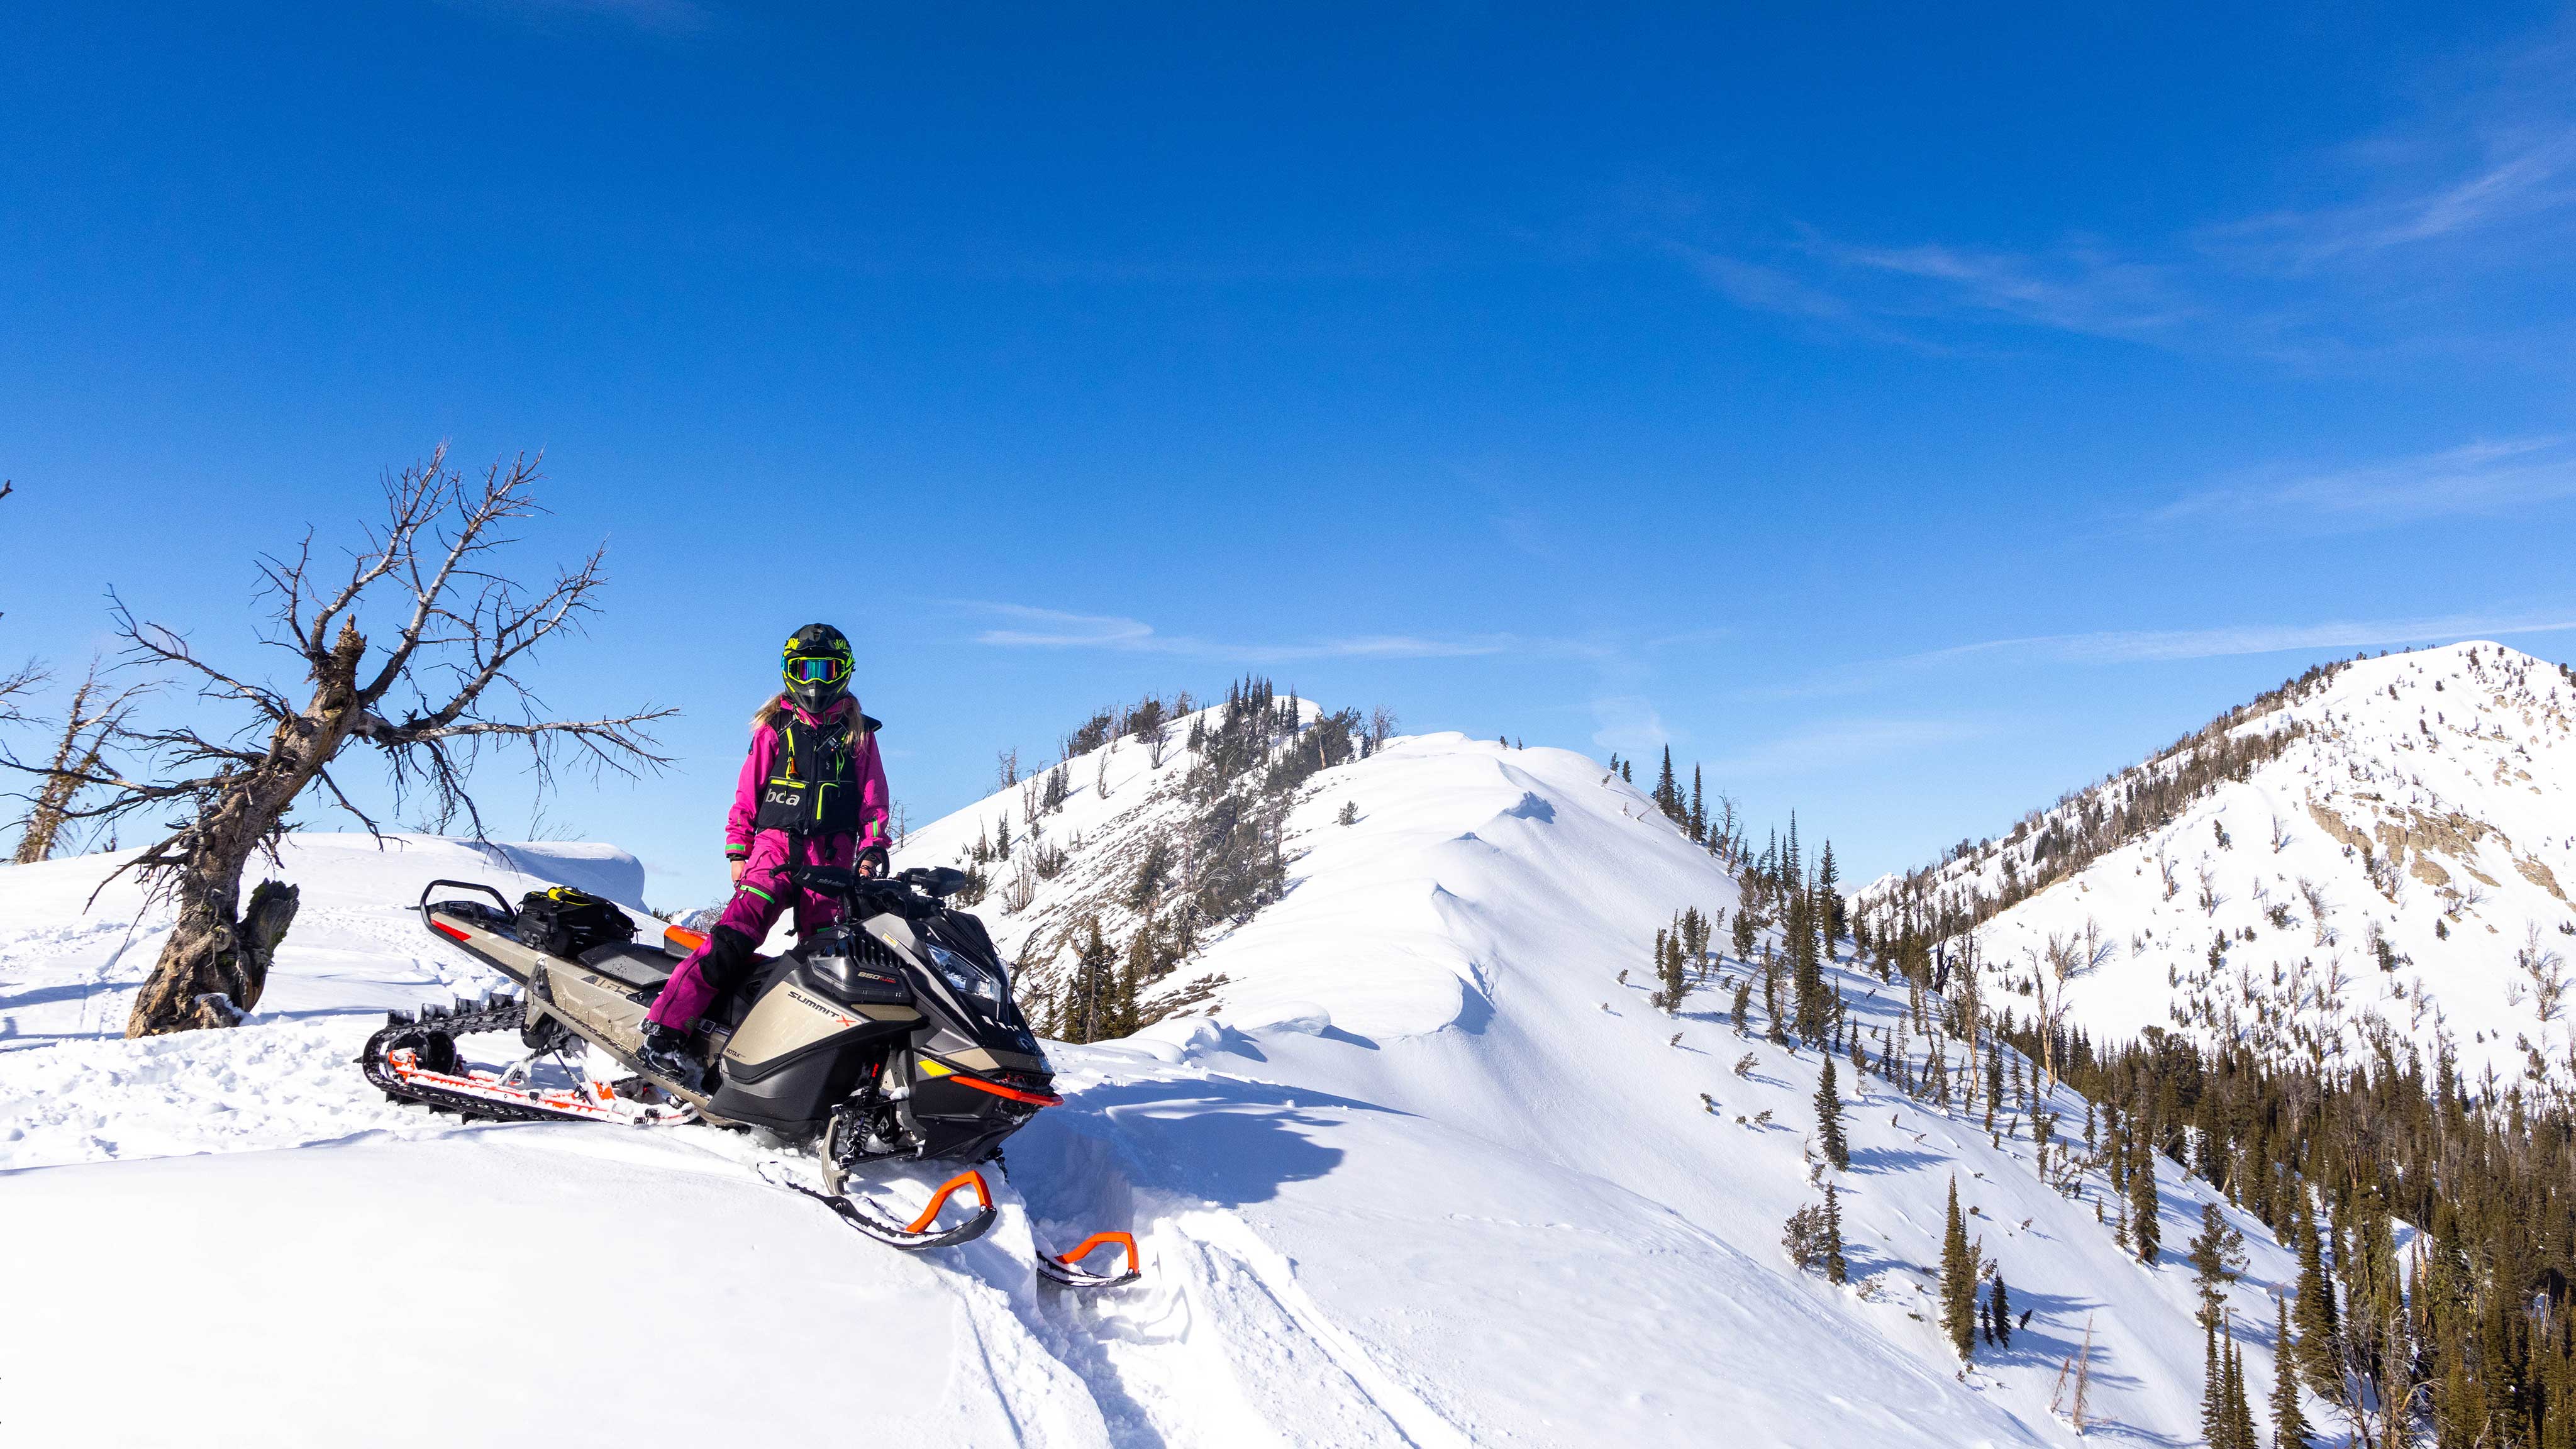 Lisa Granden at the top of a mountain on her Ski-Doo snowmobile